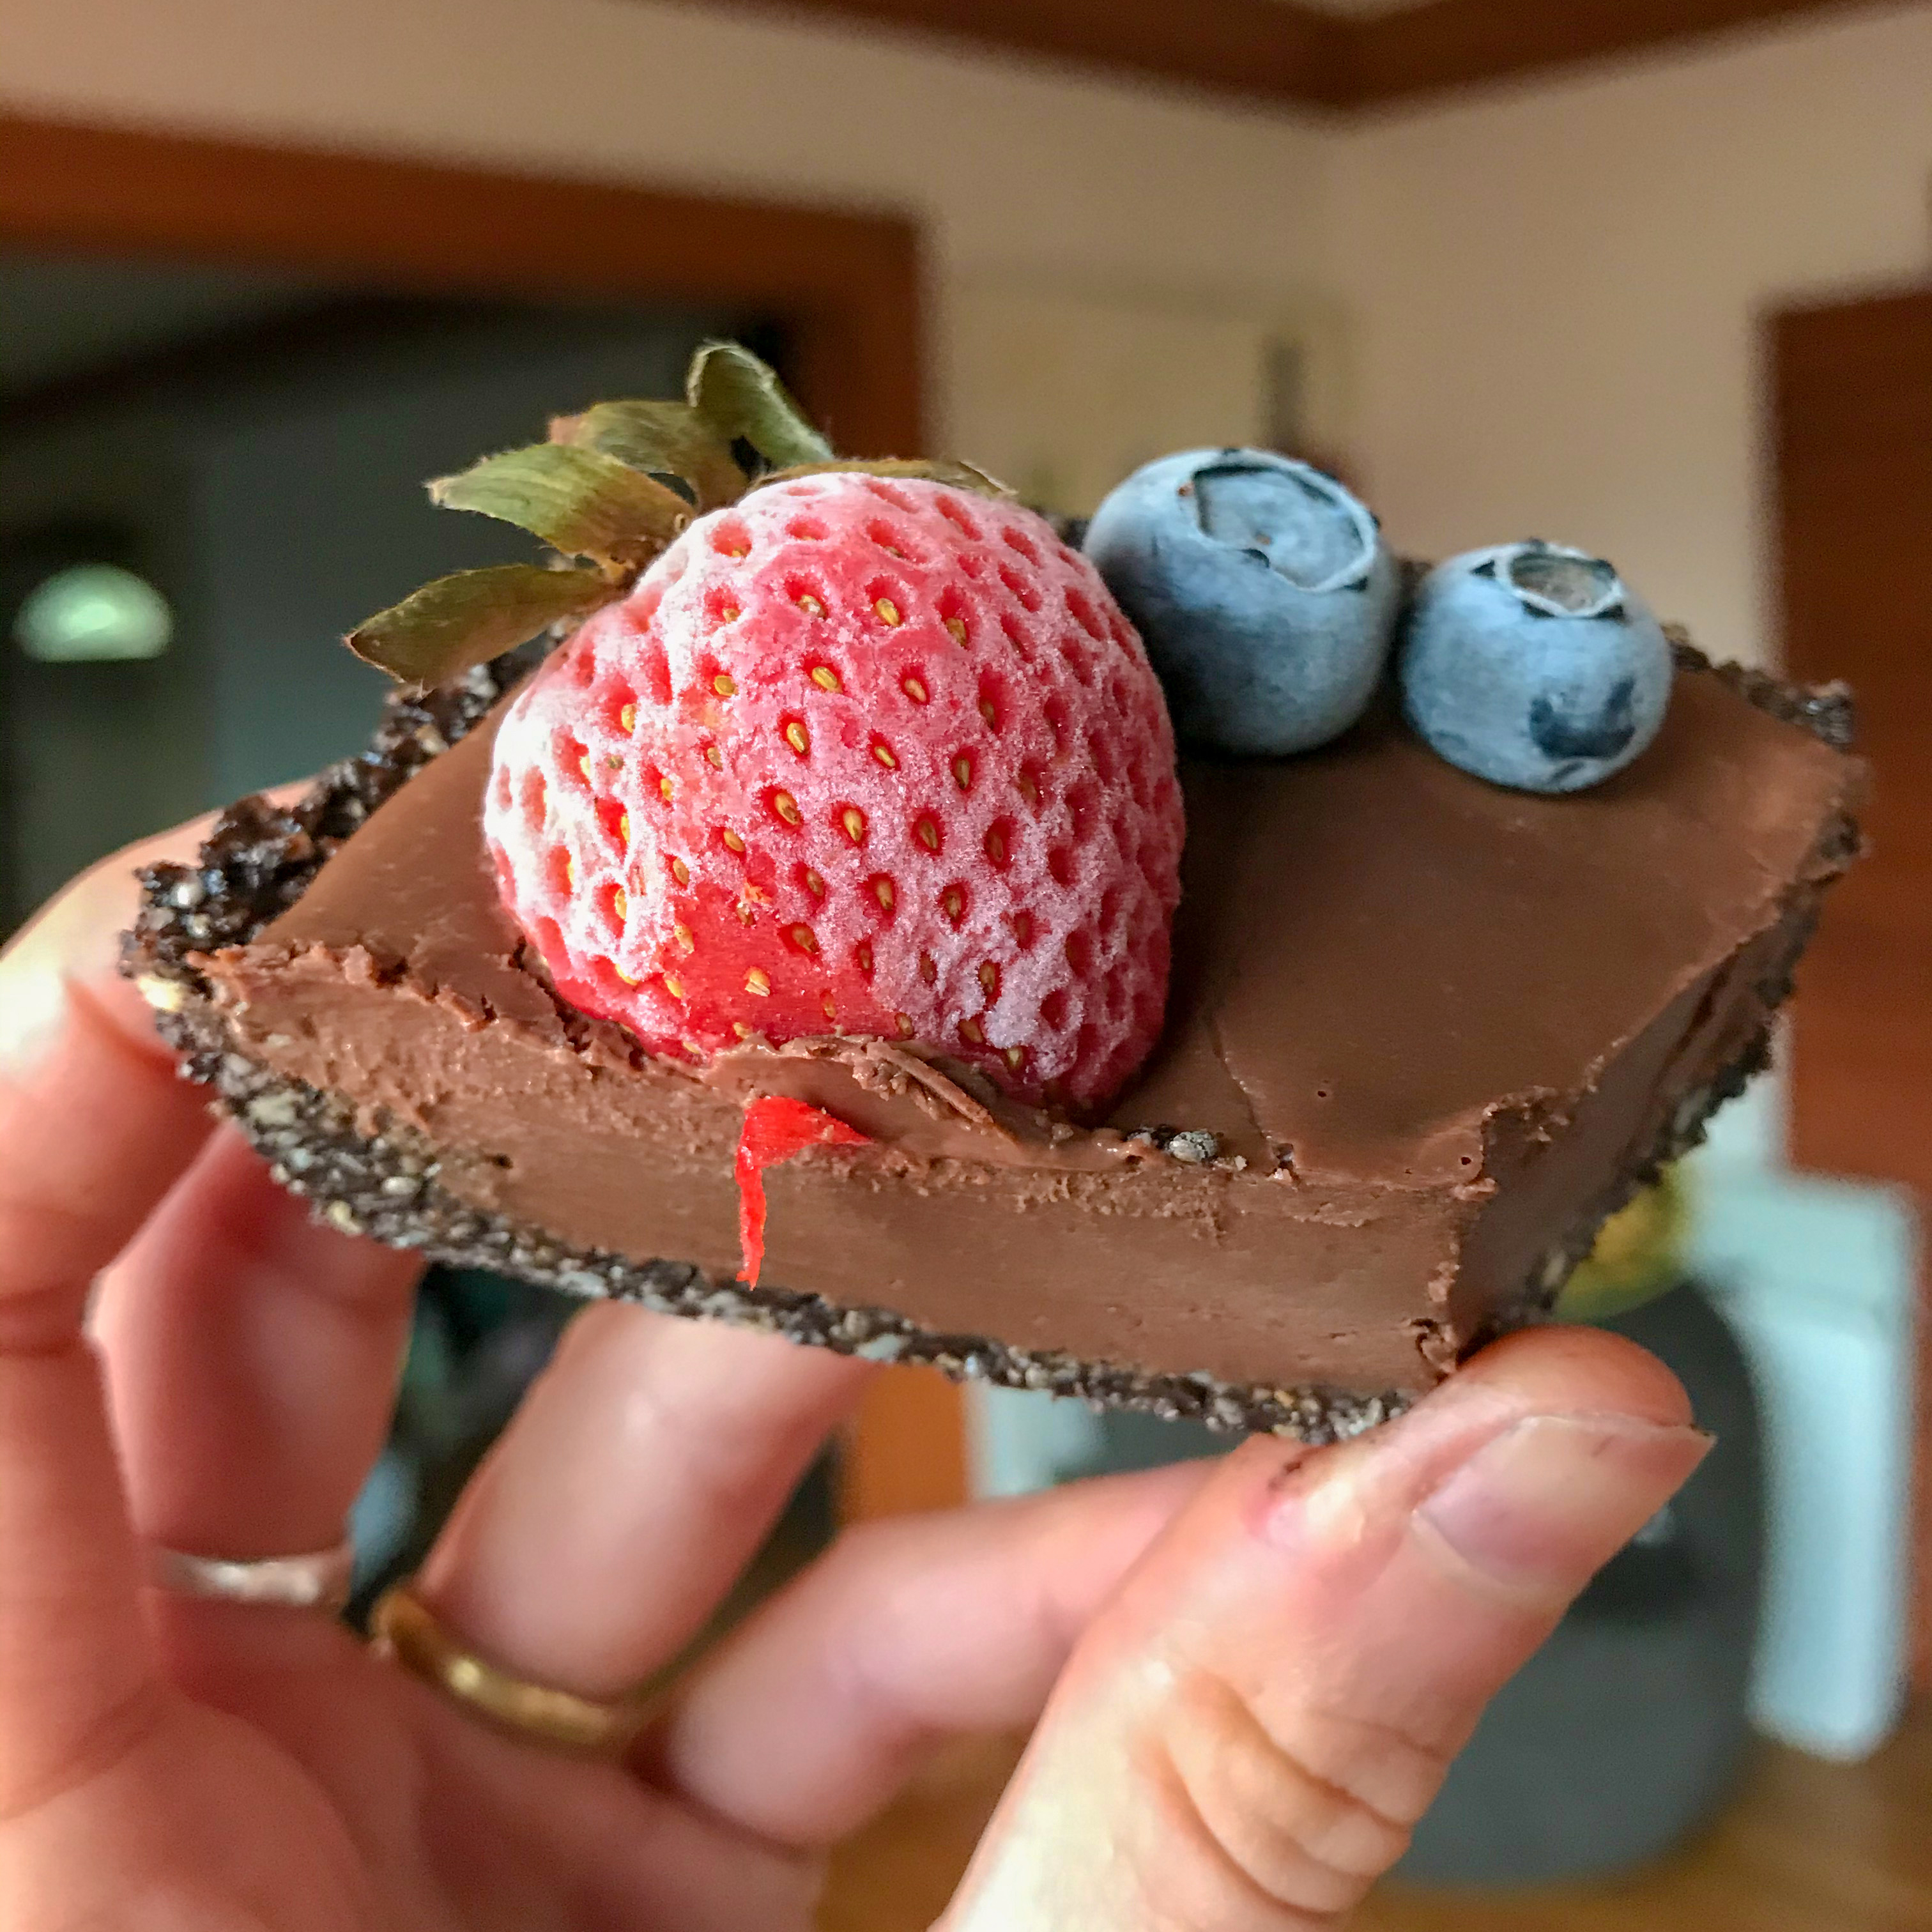 A slice of the vegan chocolate tarte with a frozen strawberry and 2 blueberries on top.